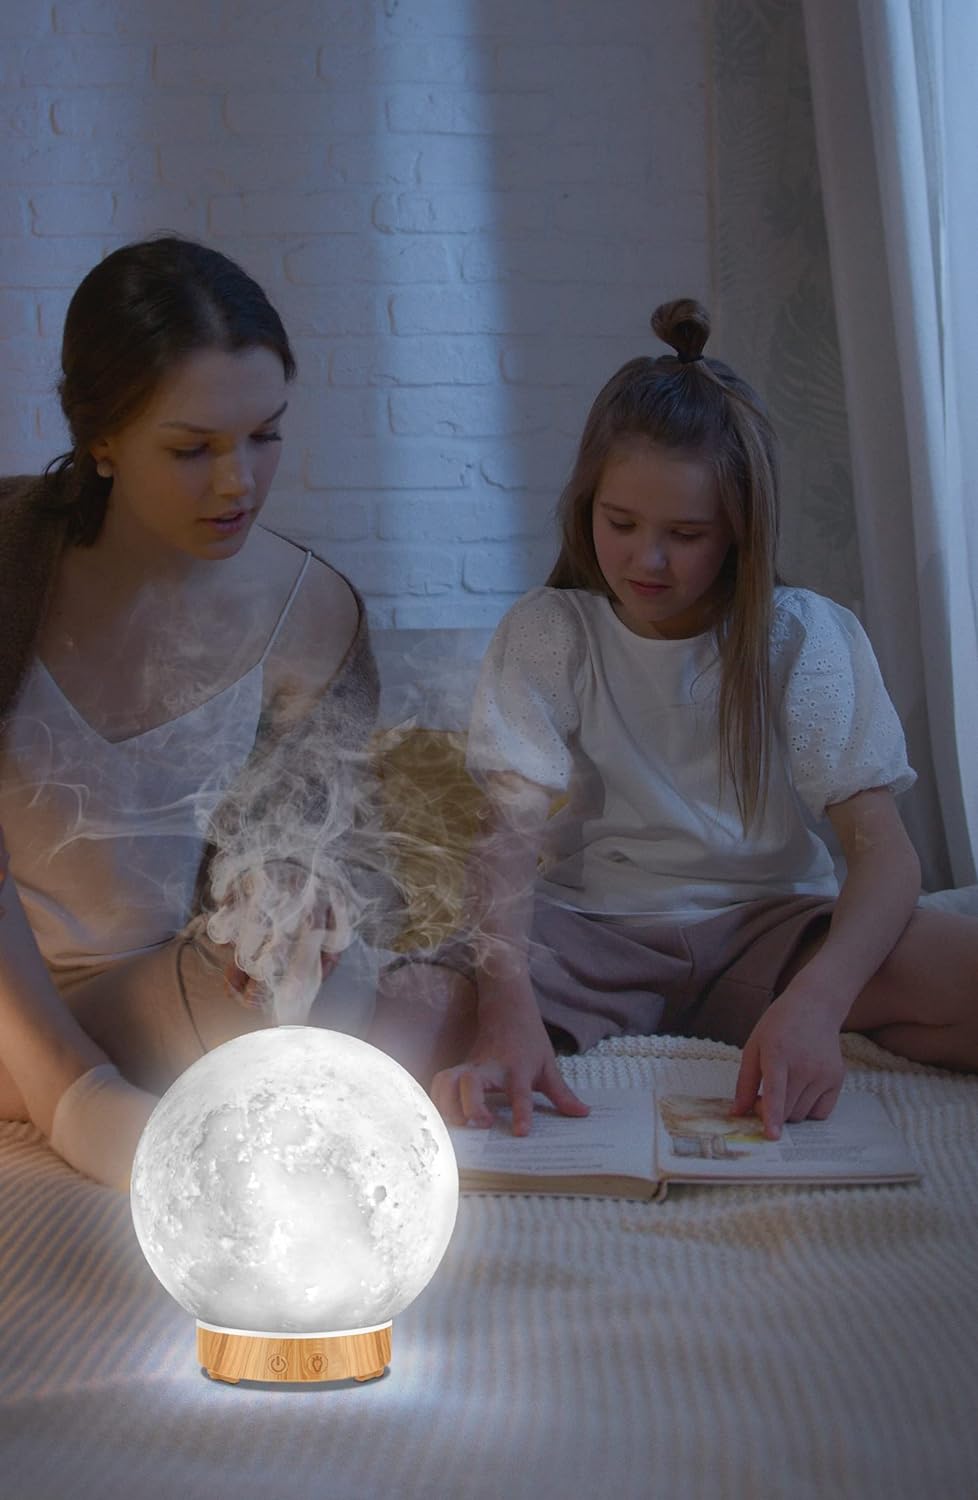 MEIDI Essential Oil Diffuser - Aromatherapy Diffuser with Remote Control, LED Desk Moon Lamp with Cool Mist Humidifier Function, Adjustable Brightness and Mist Mode